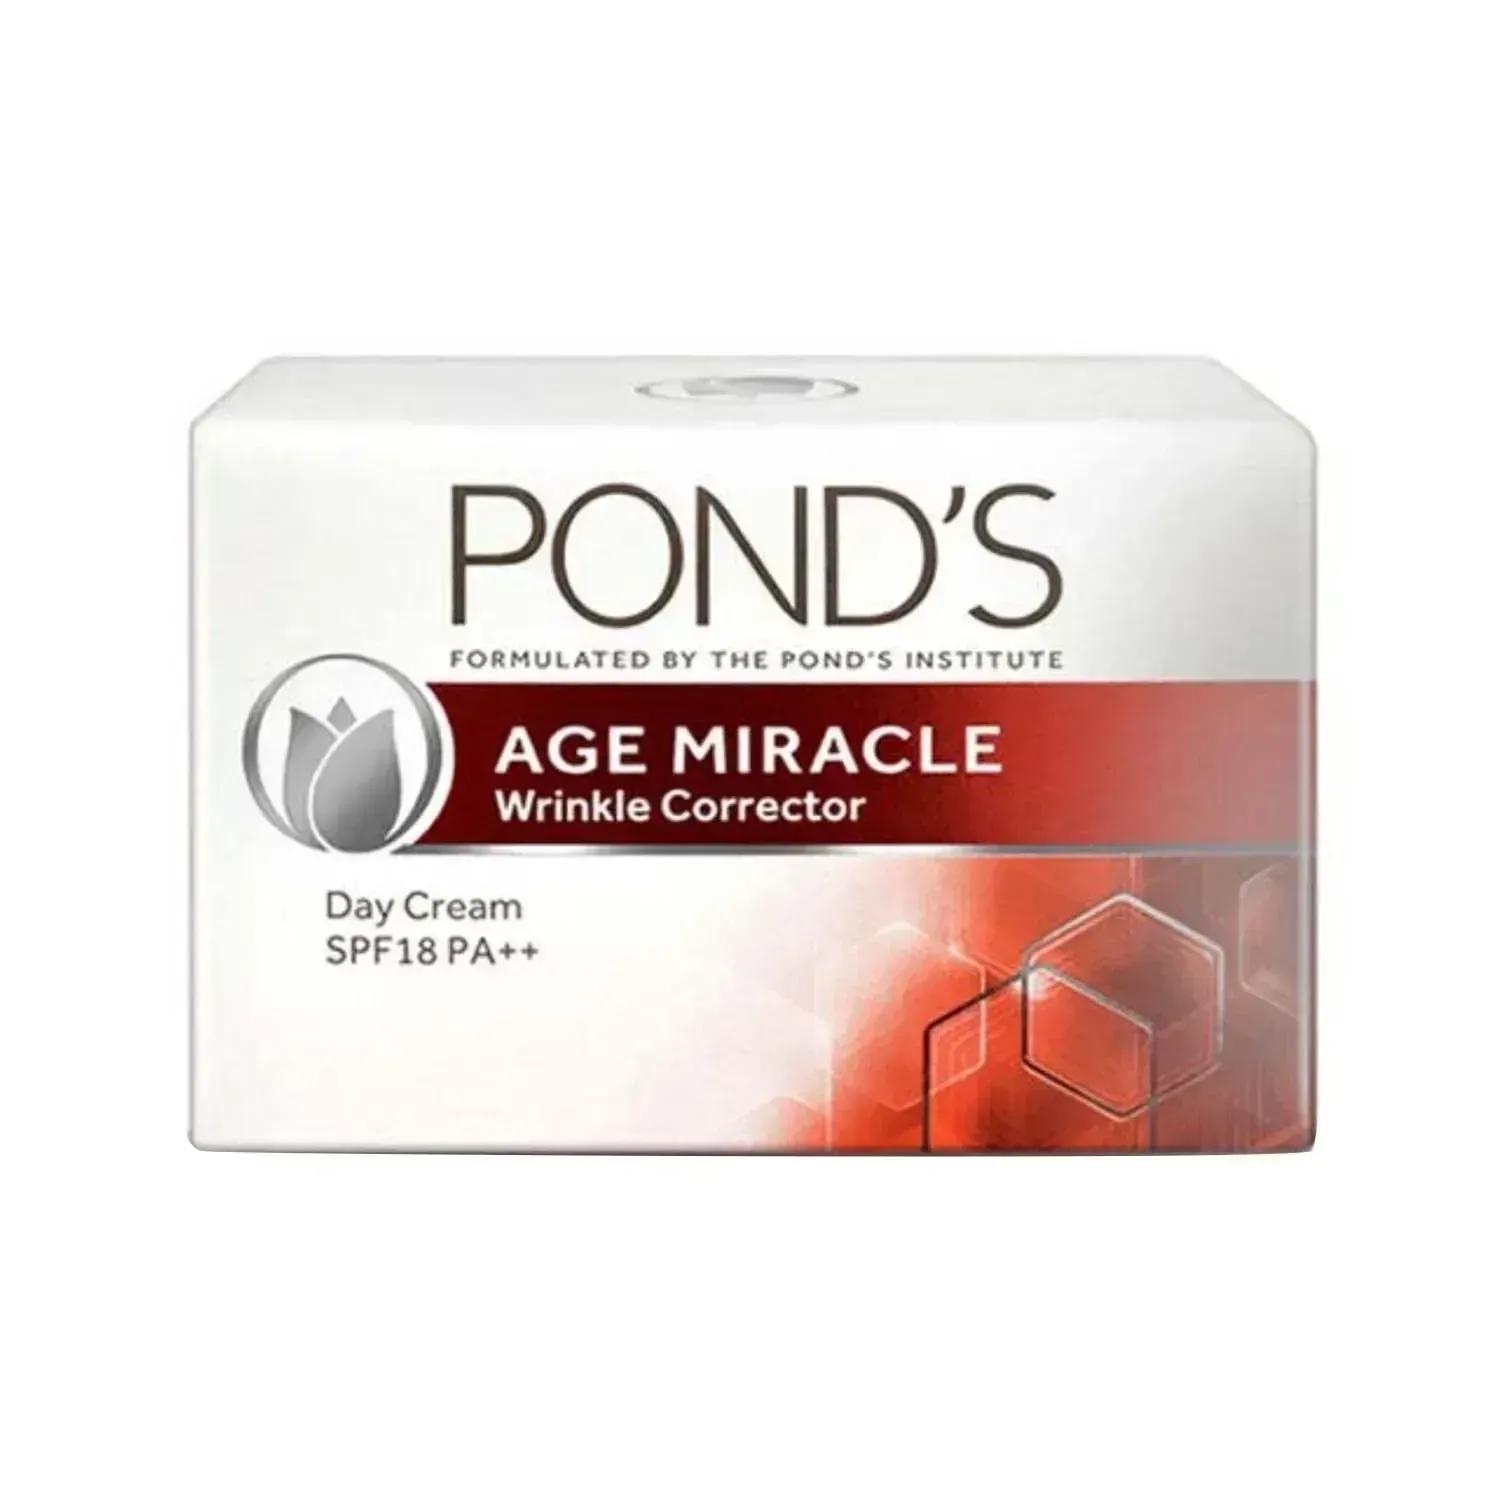 pond's-age-miracle-wrinkle-corrector-day-cream-spf-18-pa++-(50g)